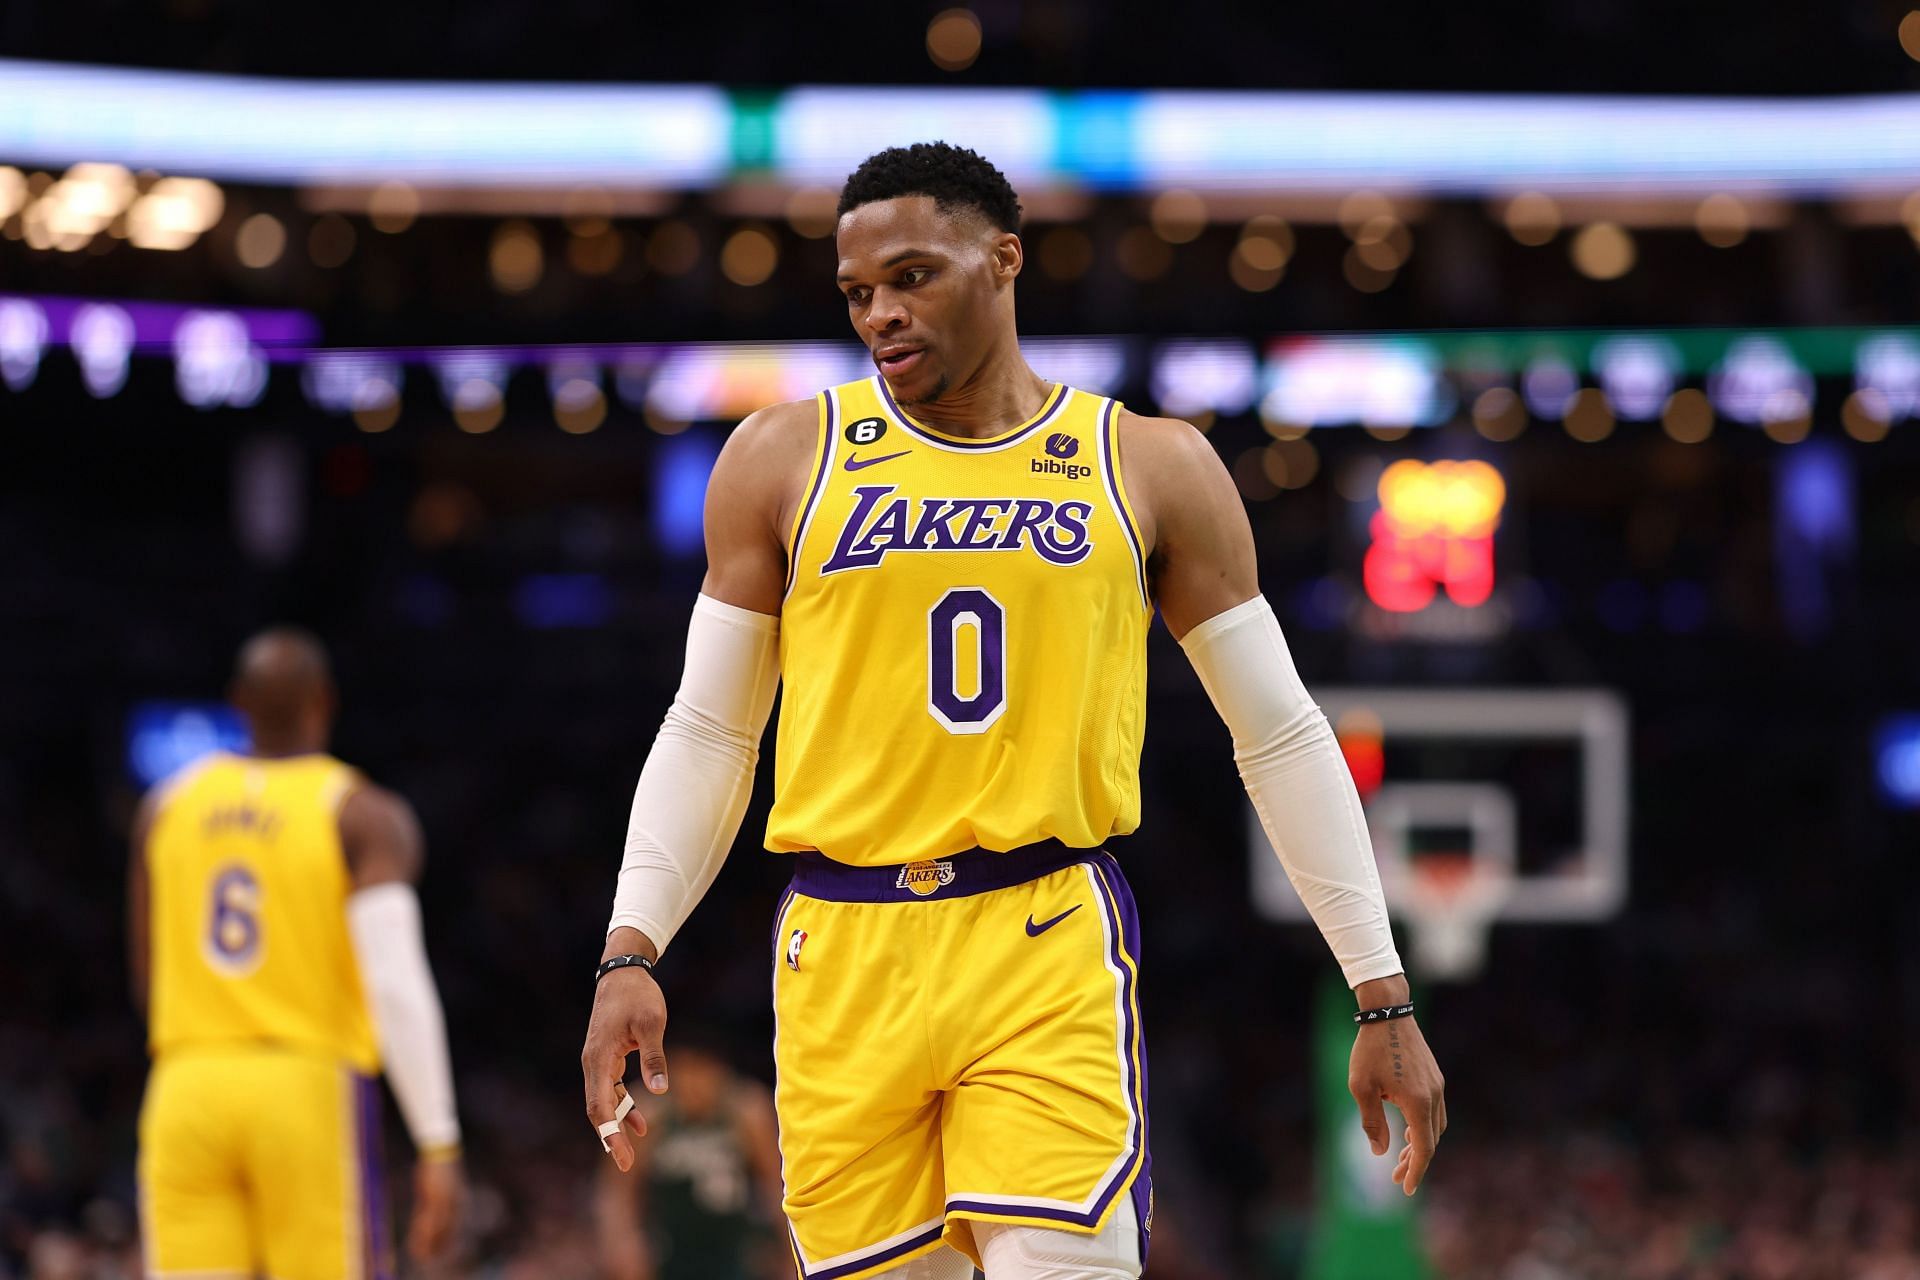 LA Lakers veteran point guard Russell Westbrook has played a key role in their resurgence after a 2-10 start